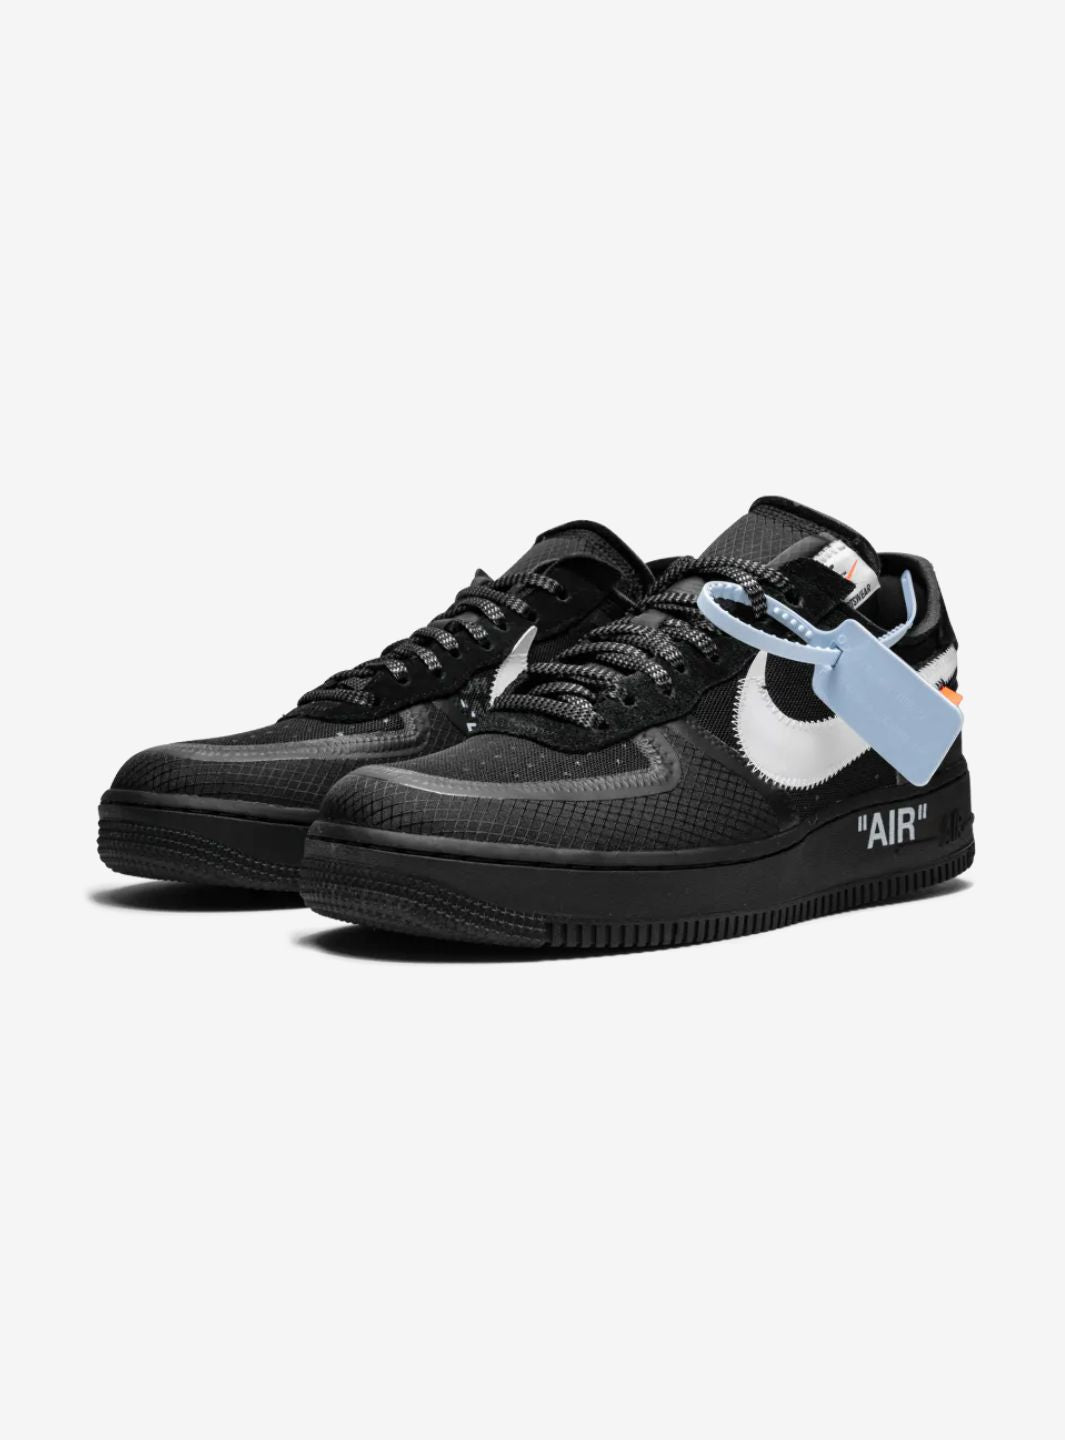 Nike Air Force 1 Low Off-White Black White - AO4606-001 | ResellZone